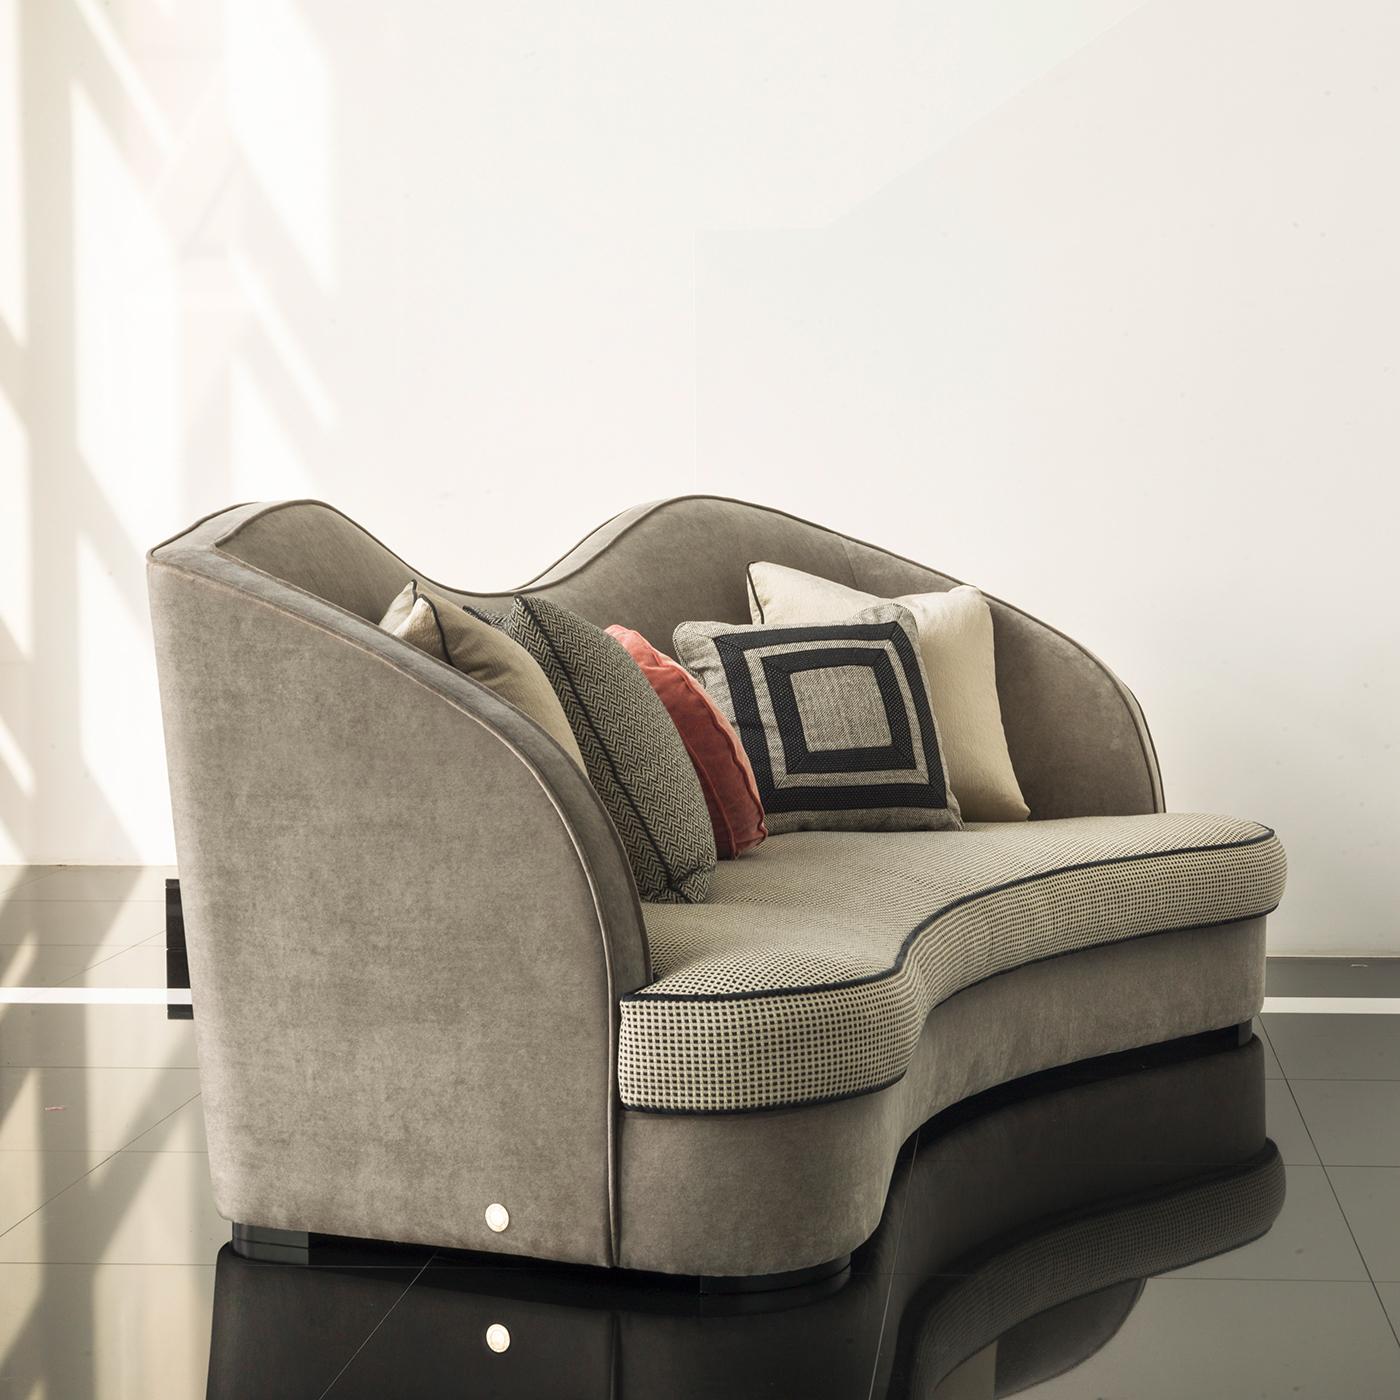 Create a cool cozy corner in a contemporary living room with the Gianni 3-seat sofa by Chiara Provasi. A designer who doesn't shy away from extravagance, Provasi's Gianni proves that sometimes more is more. With a softly curving frame and backrest,